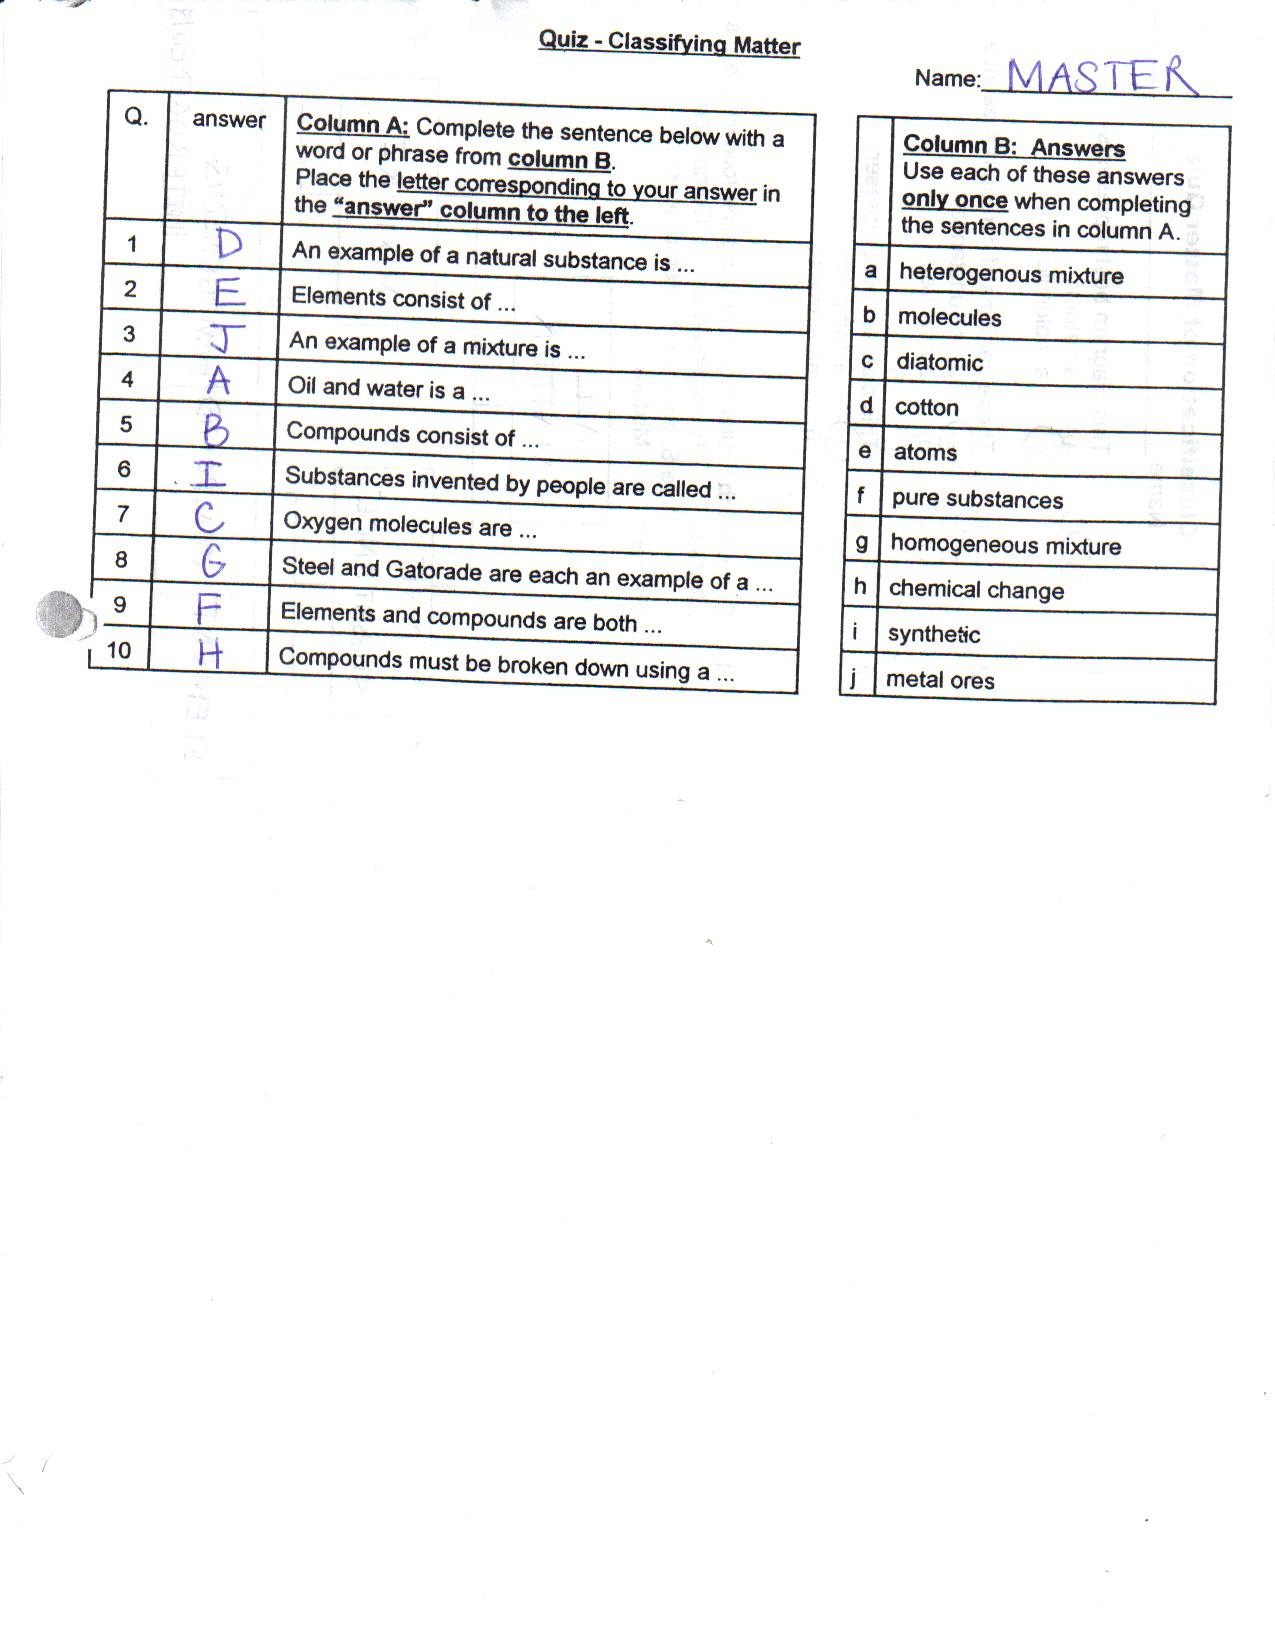 Worksheet Classification Of Matter toxic Science